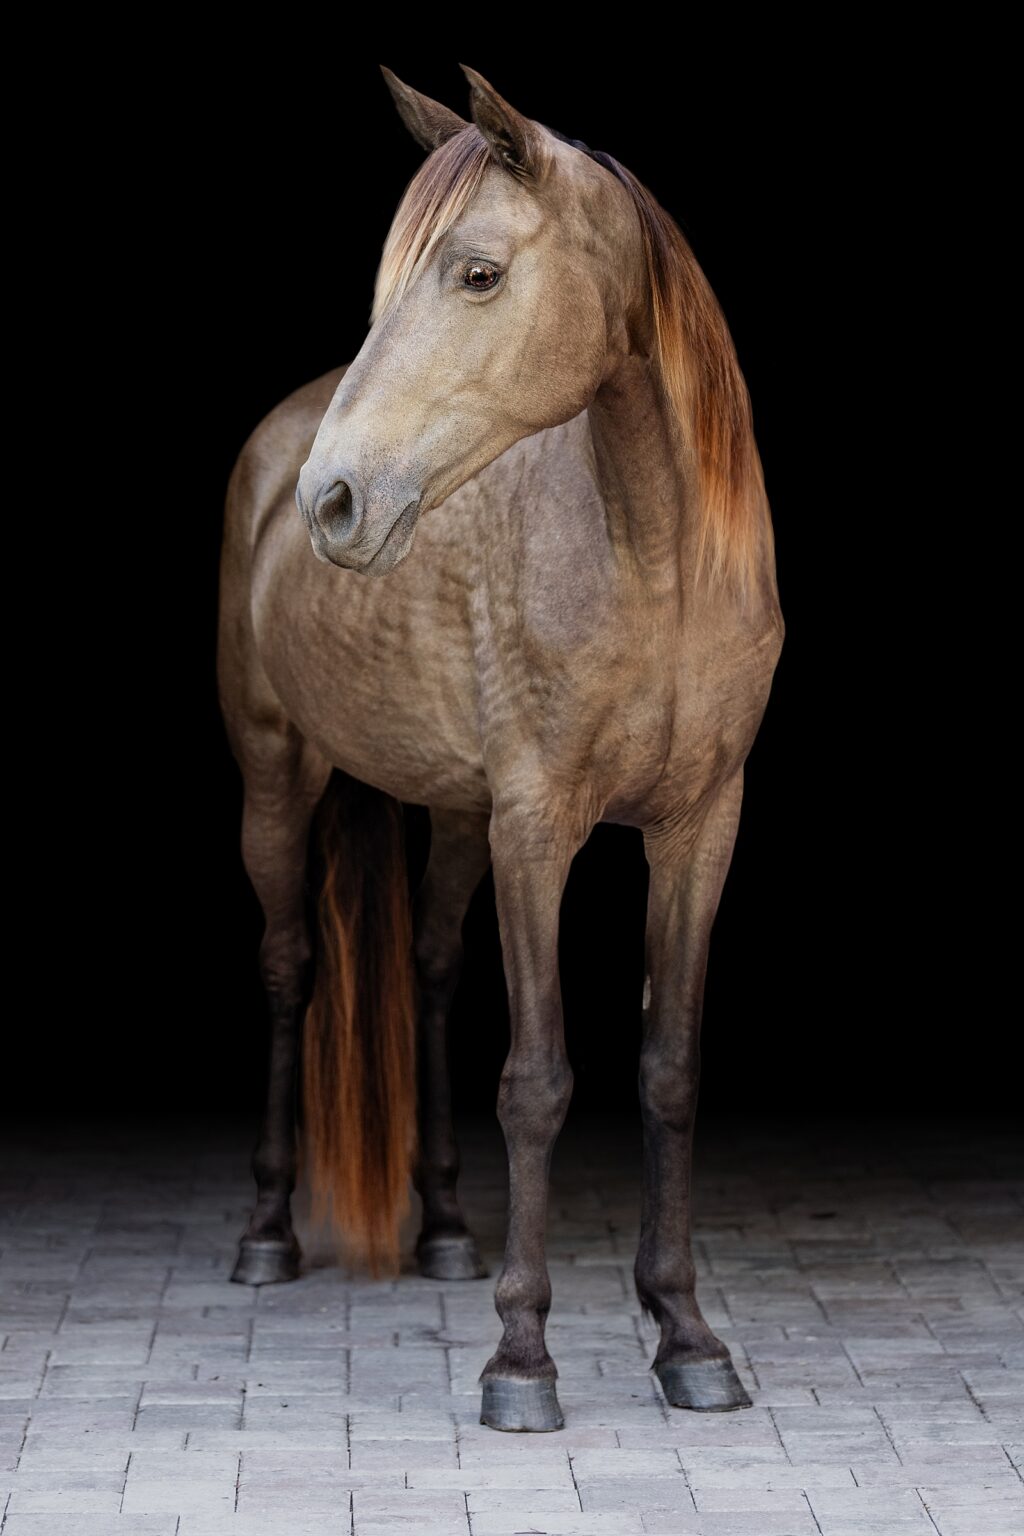 Horse art in Ocala of unique colored Tennessee Walking Horse mare by professional equine photographer in Florida.